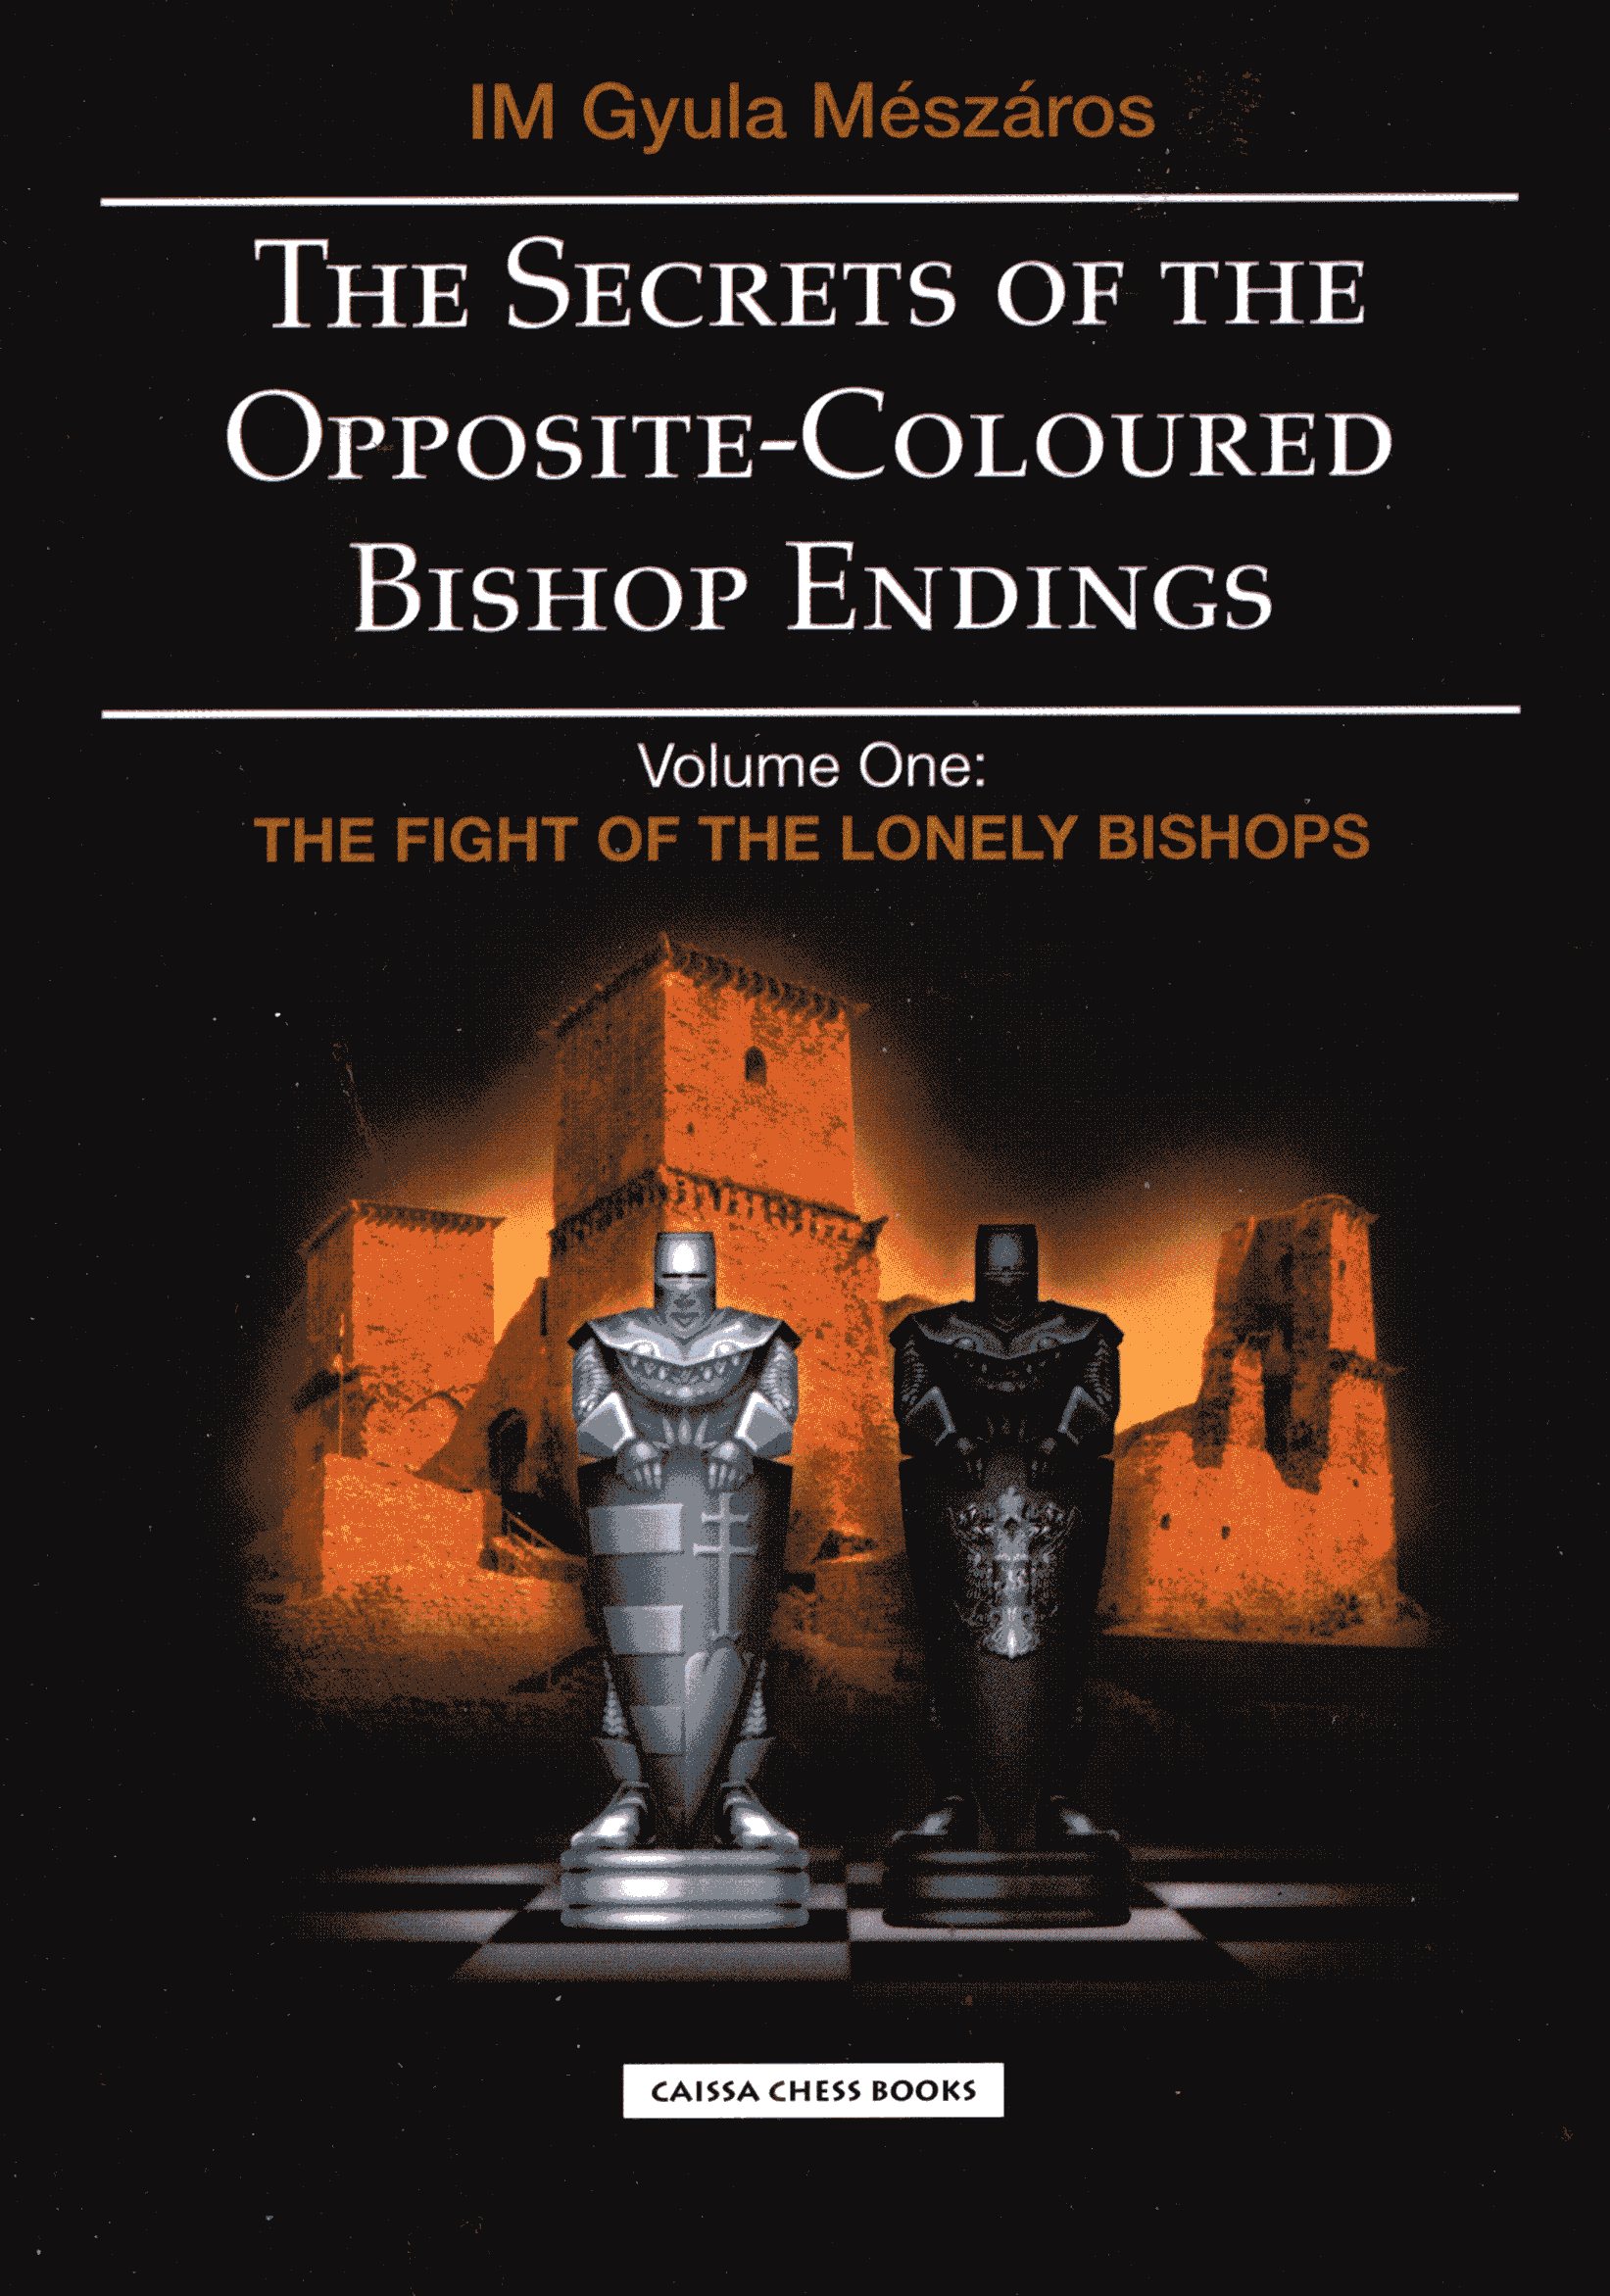 The Secrets of the Opposite-Coloured Bishop Endings (Volume One). The Fight for Lonely Bishops